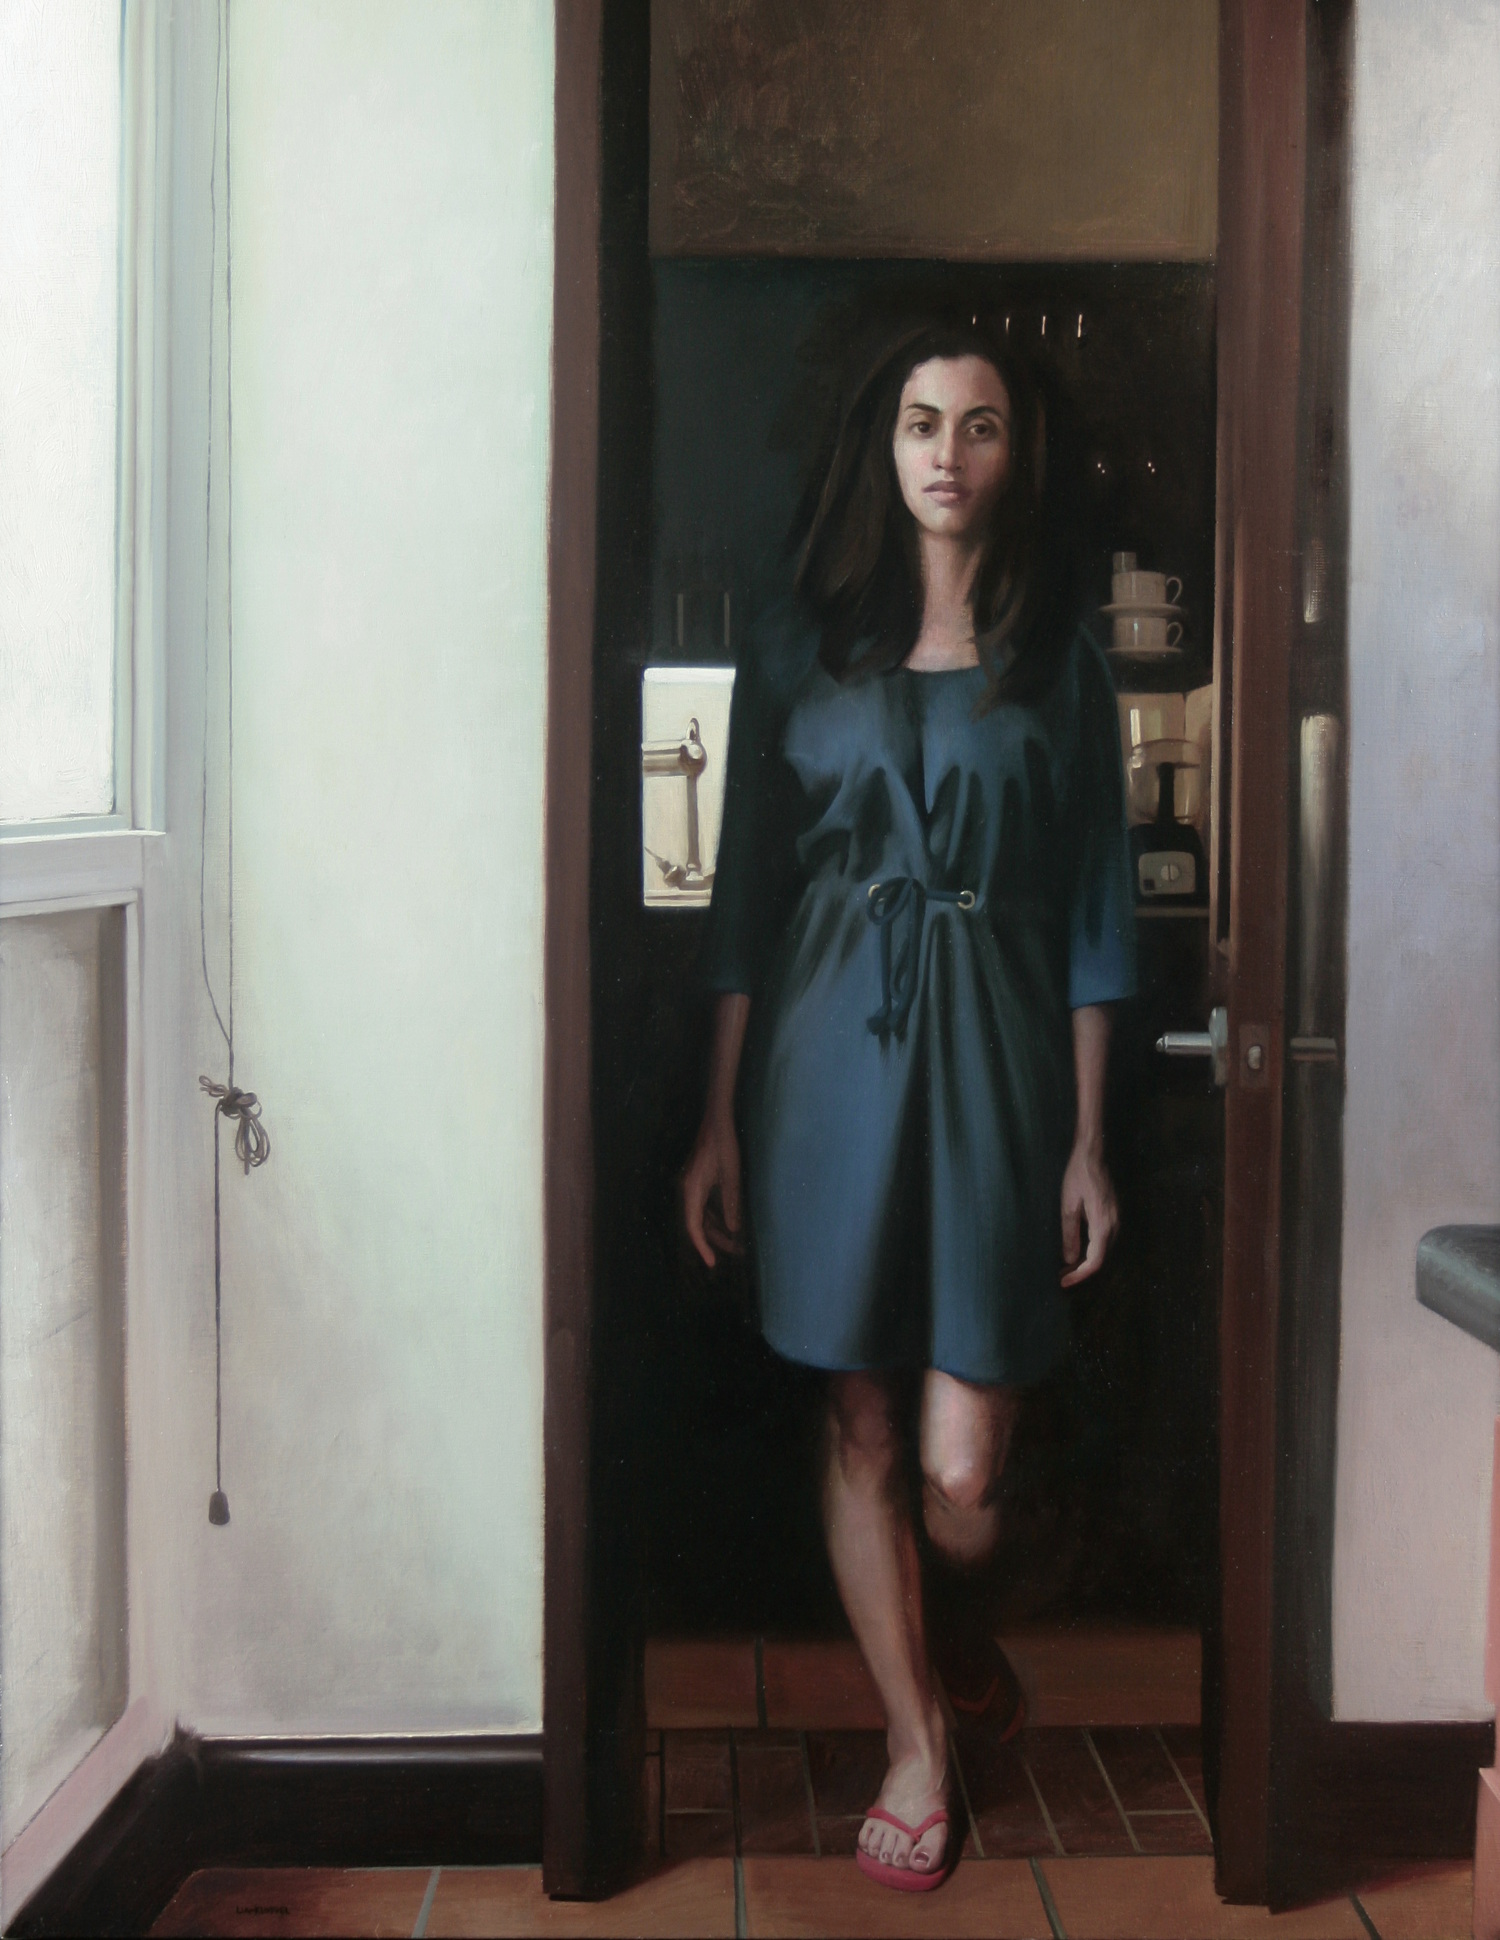   Threshold , 2011, Oil on linen, 36 x 28 inches, Private collection 